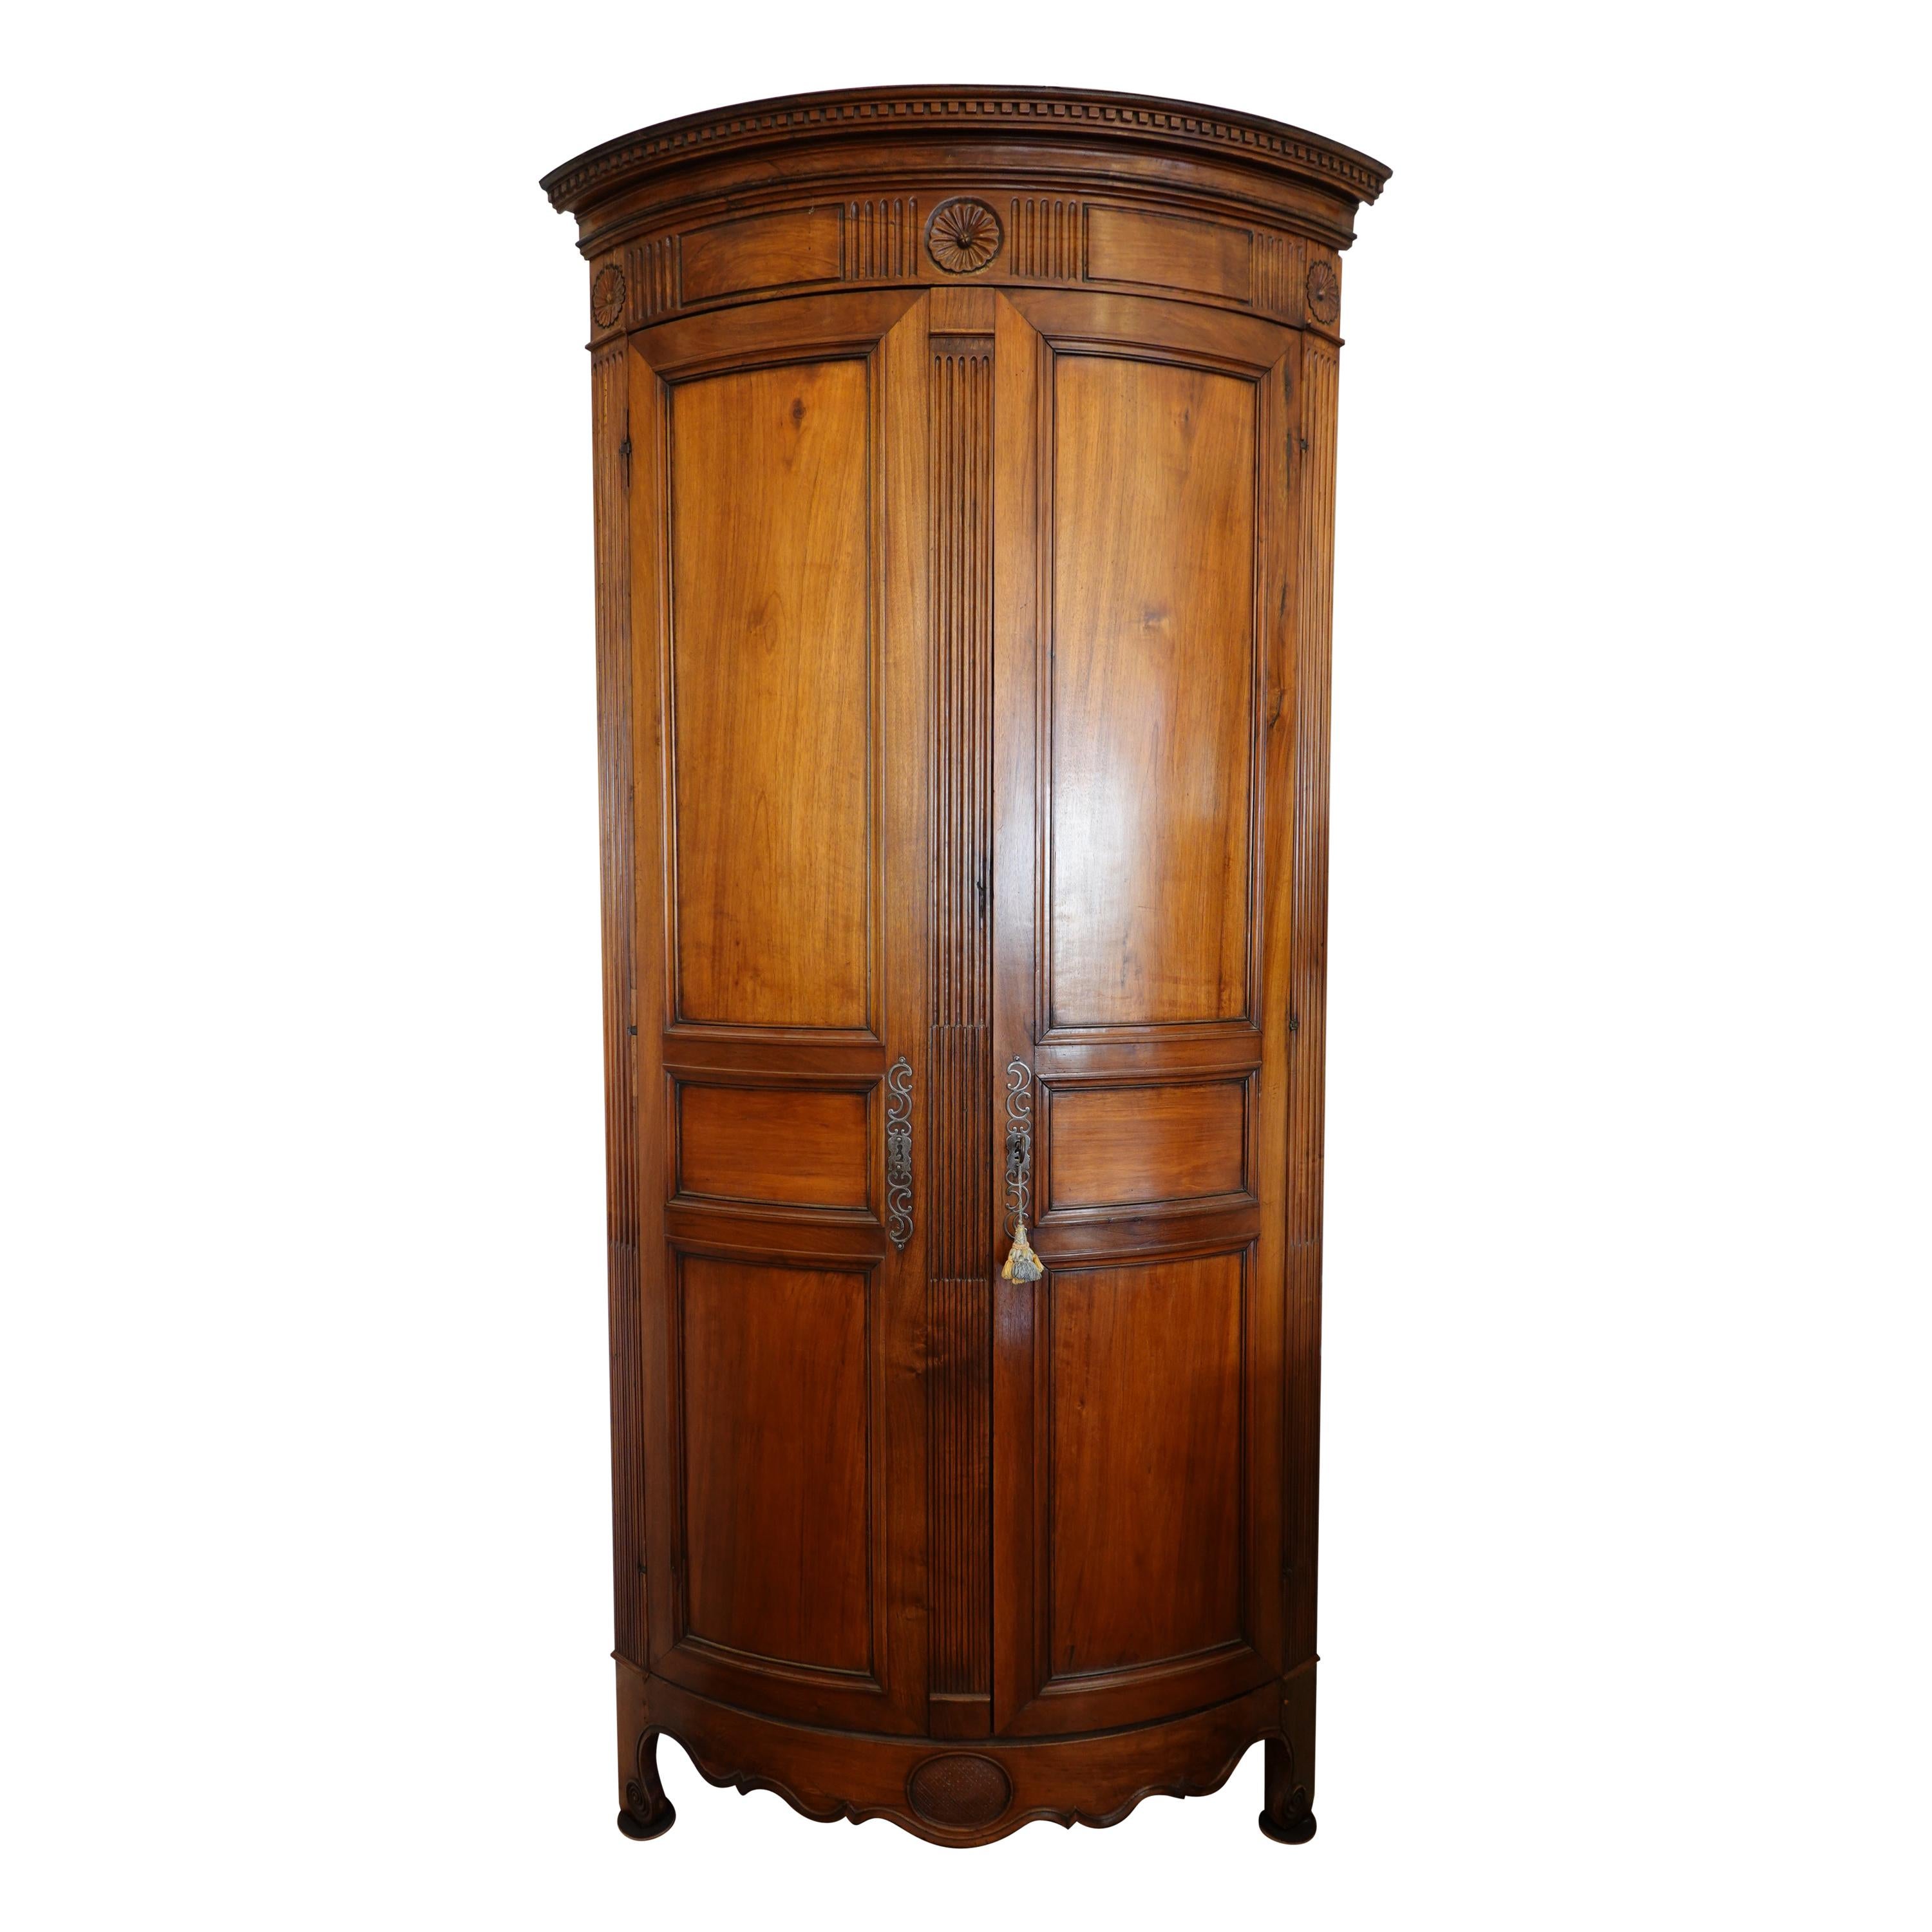 Louis XVI Period Corner Cabinet or Encoignure in Walnut with Curved Facade